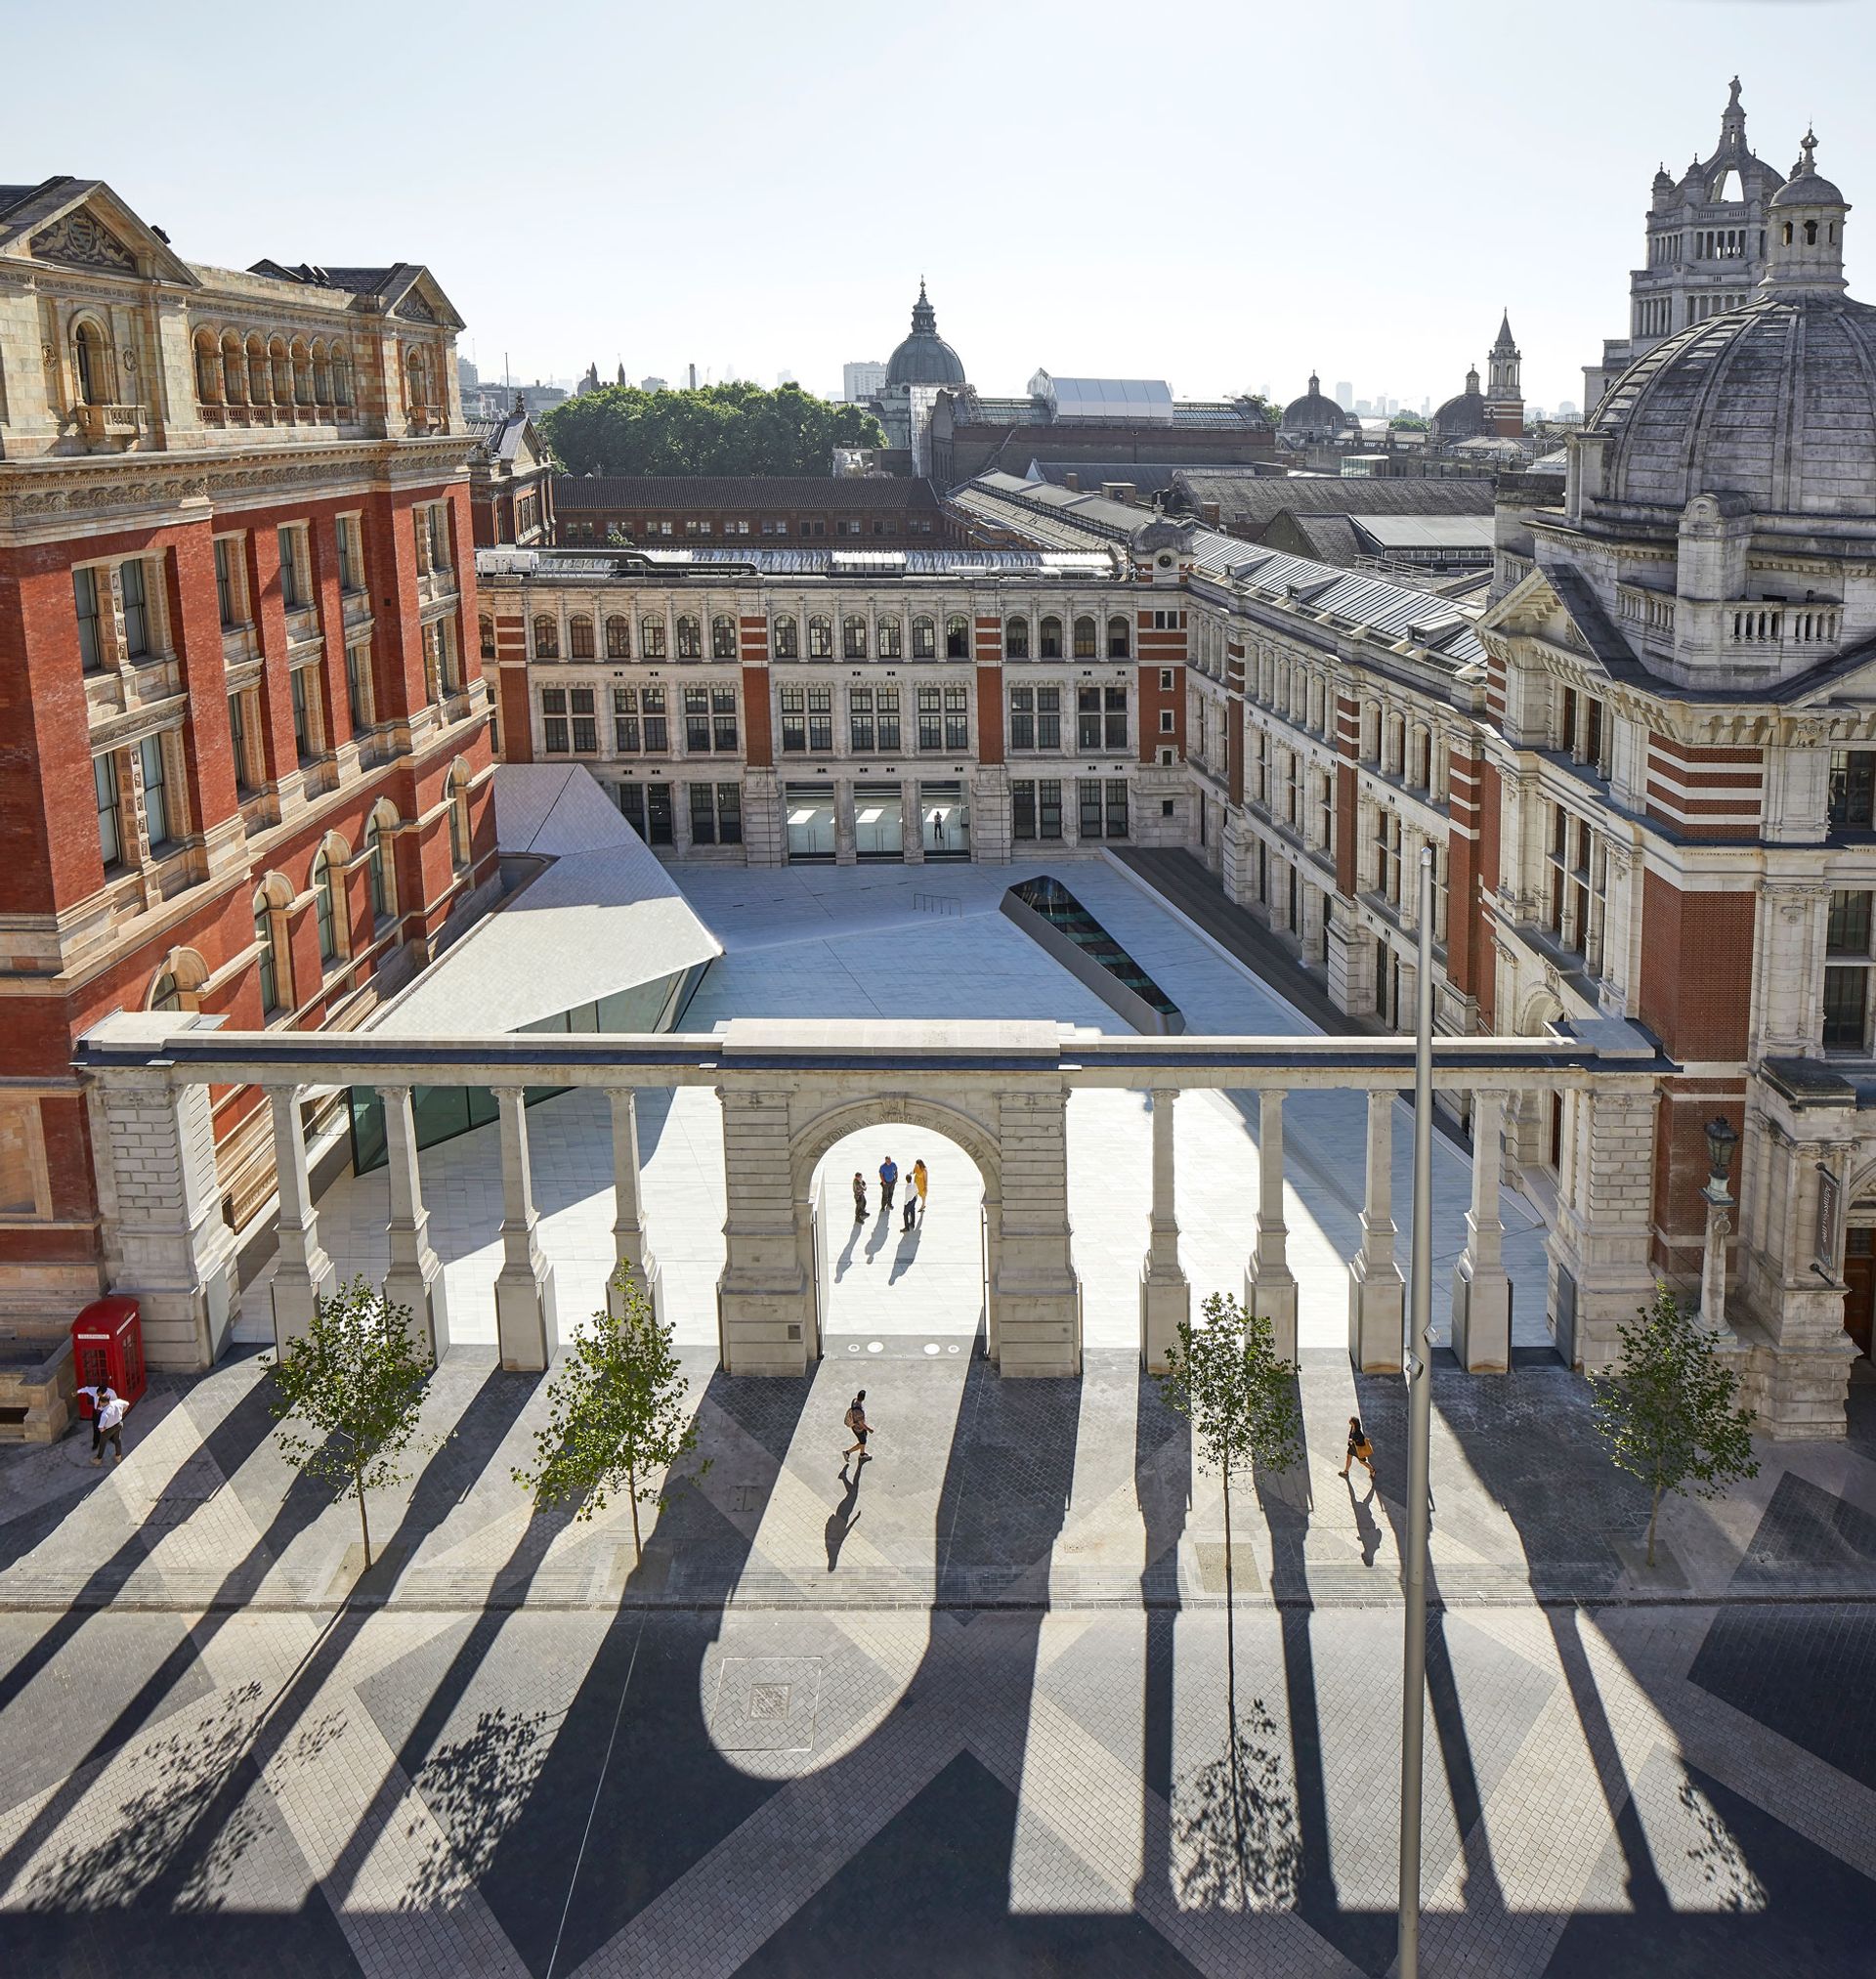 The Victoria & Albert Museum in London is forecasting an 85% drop in visitors as a worst-case scenario after reopening © Hufton+Crow